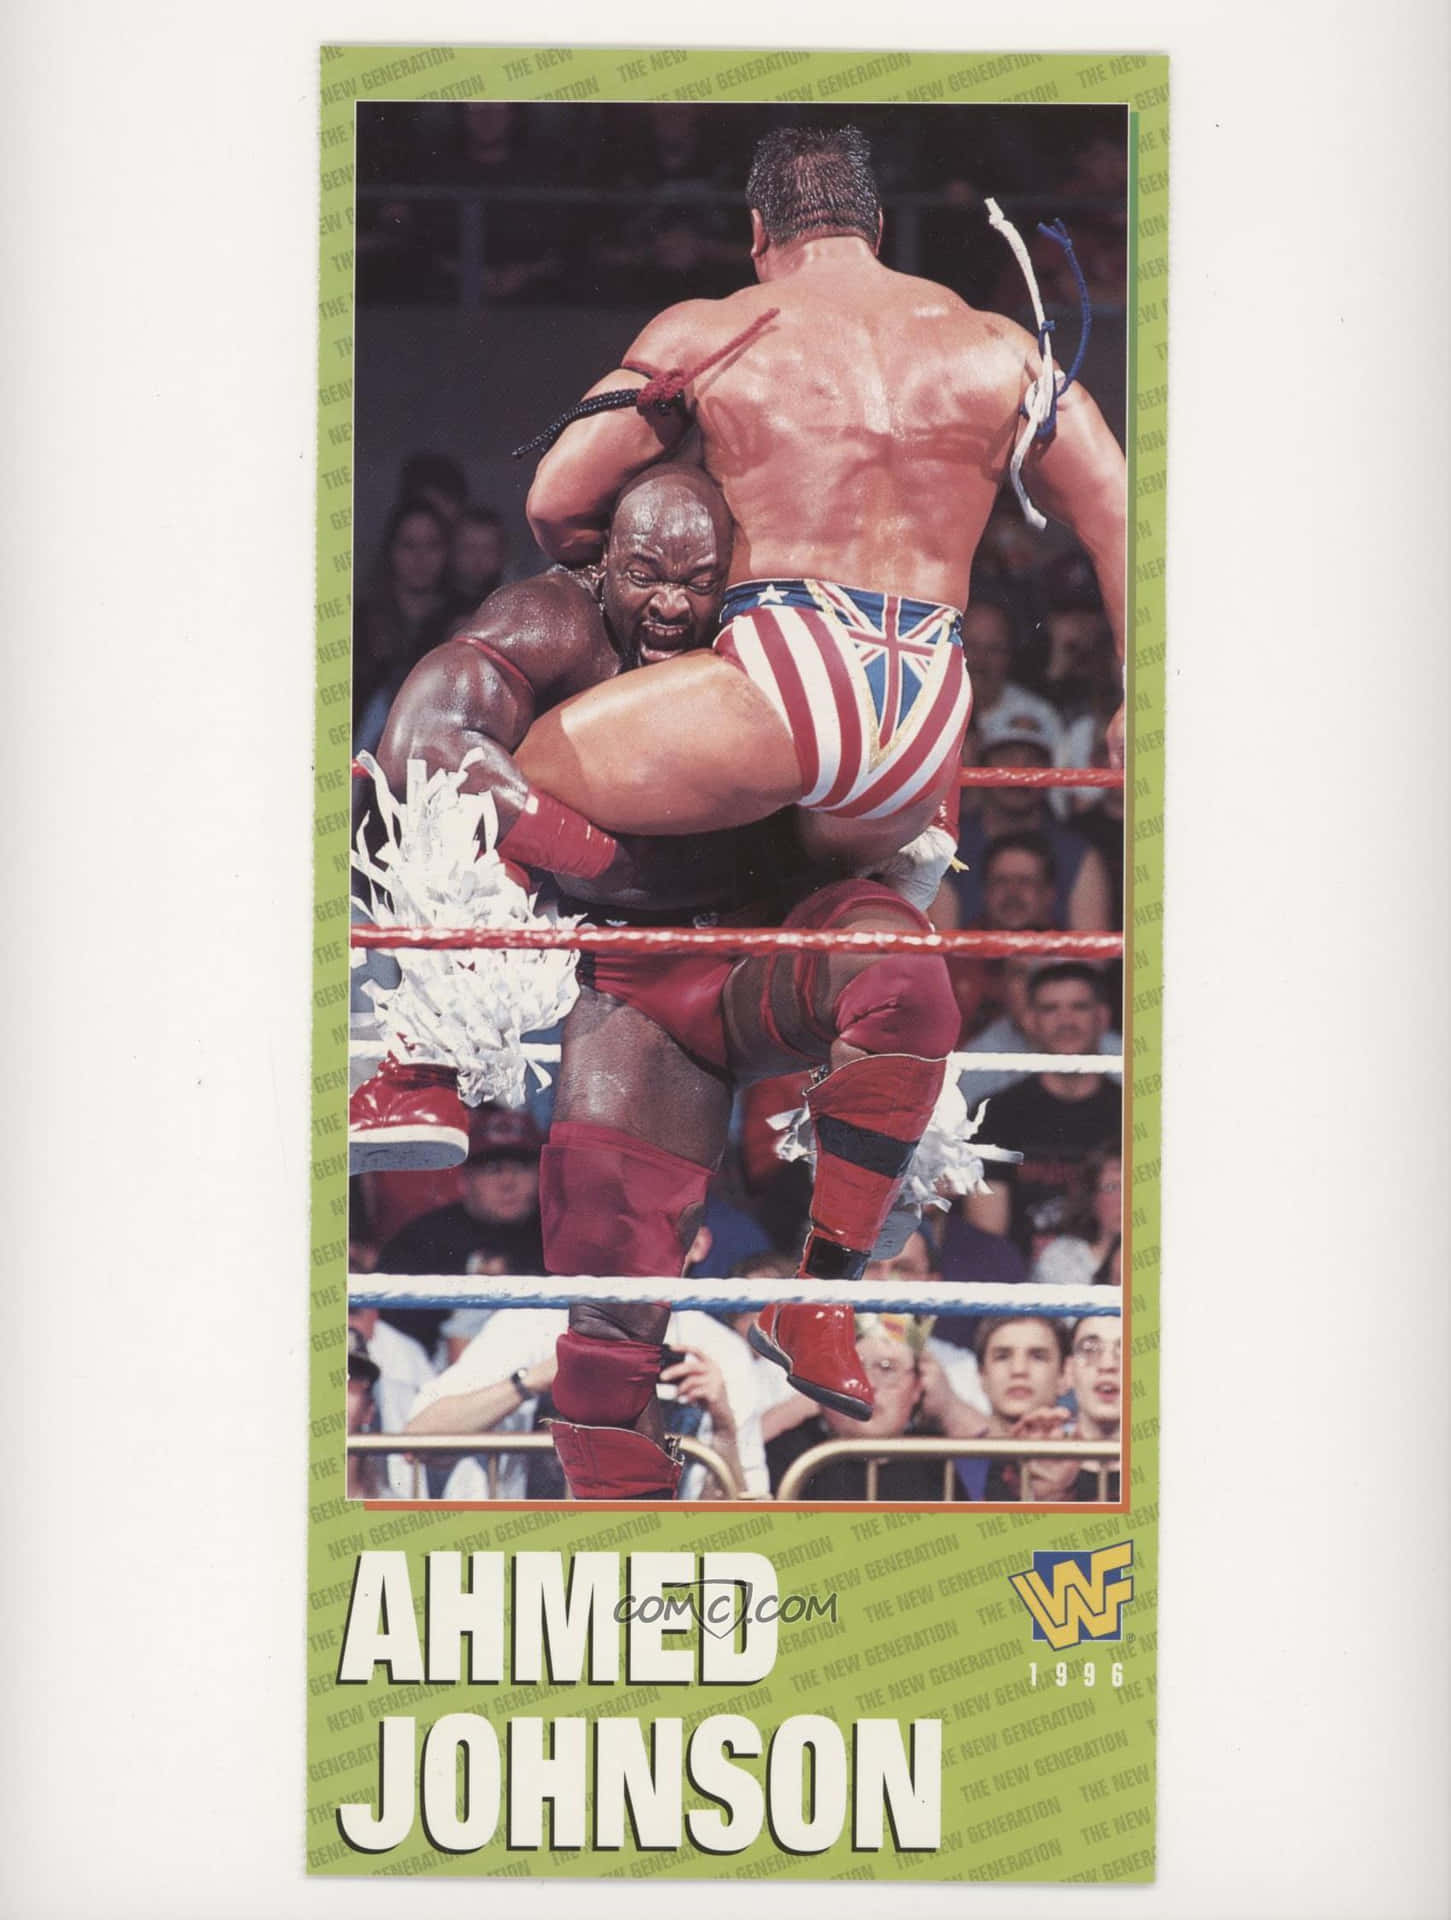 Ahmed Johnson Fighting Lex Luger Poster Wallpaper